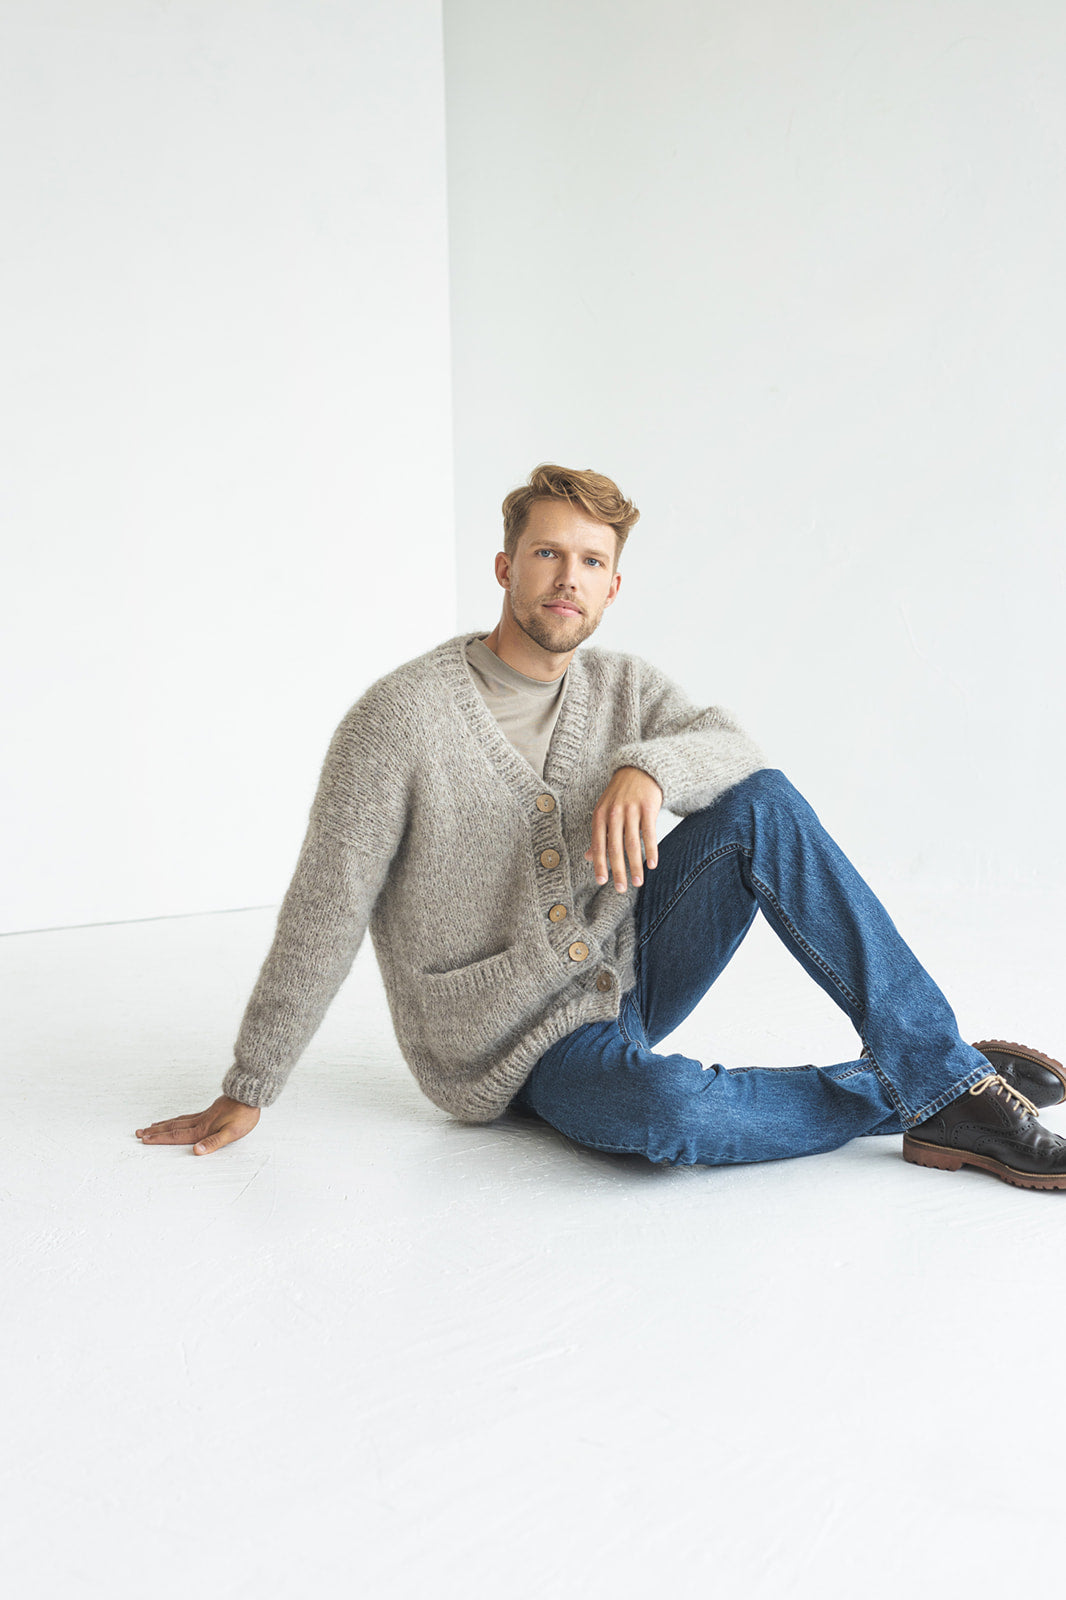 Men's knitted light gray alpaca wool cardigan, grey cable knit Scandinavian sweater for man, minimalist jacket with buttons, pockets for men